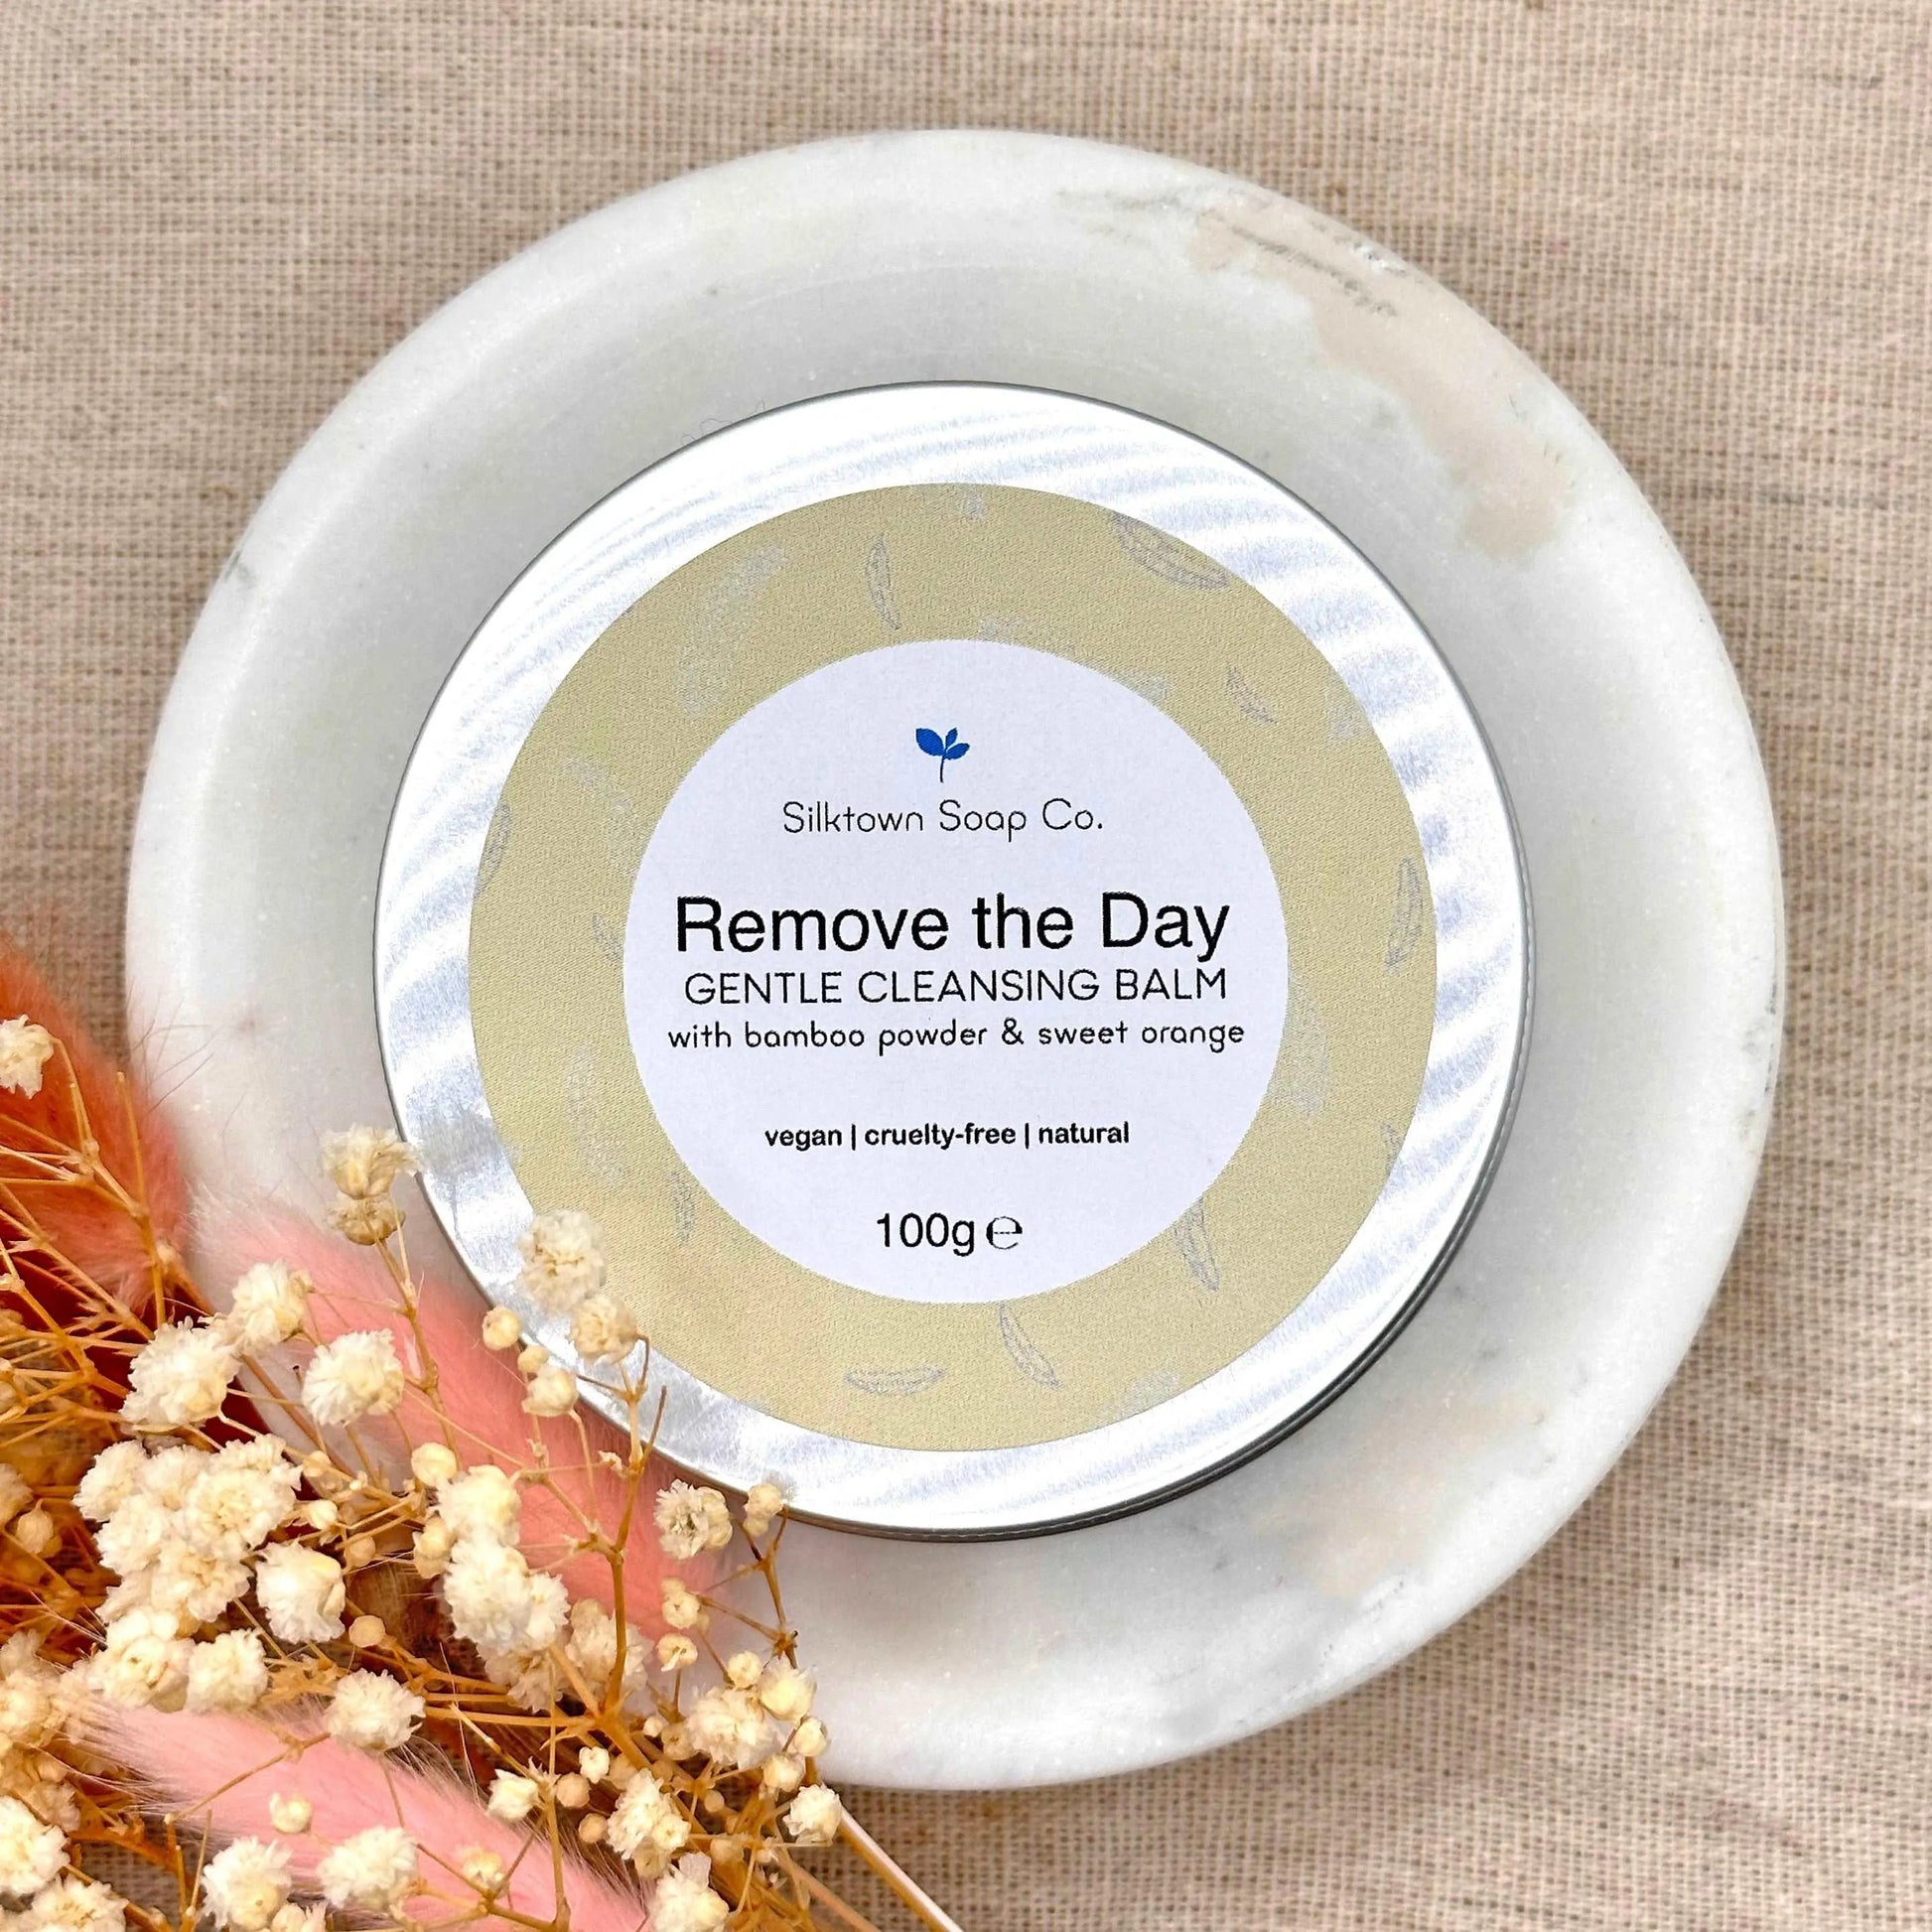 Remove the Day Gentle Cleansing Balm